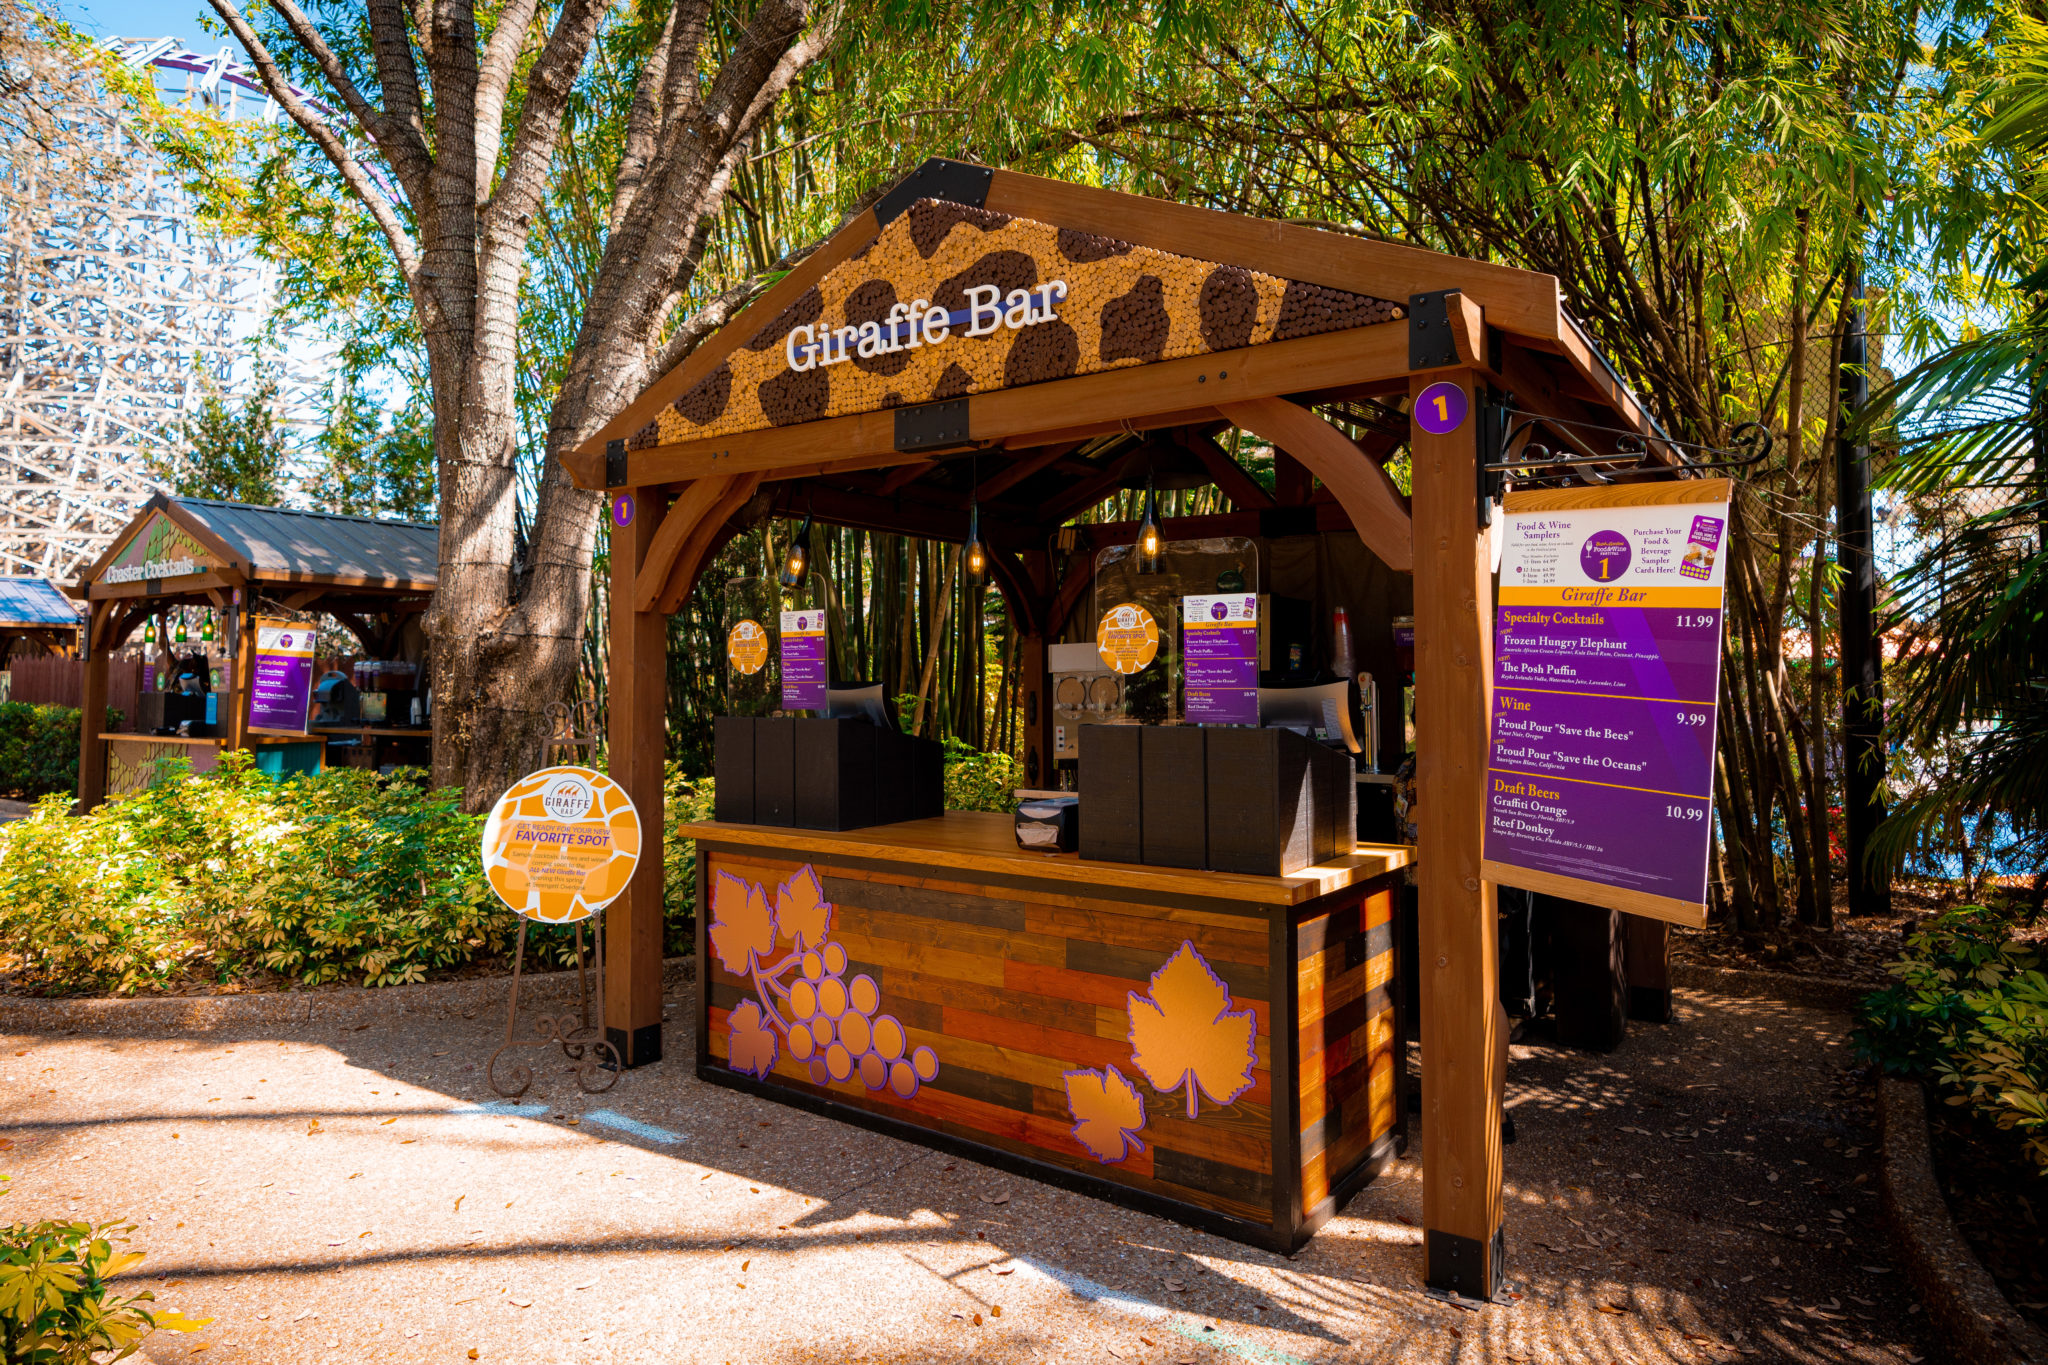 Review Busch Gardens Tampa Bay's Food & Wine Festival 2021